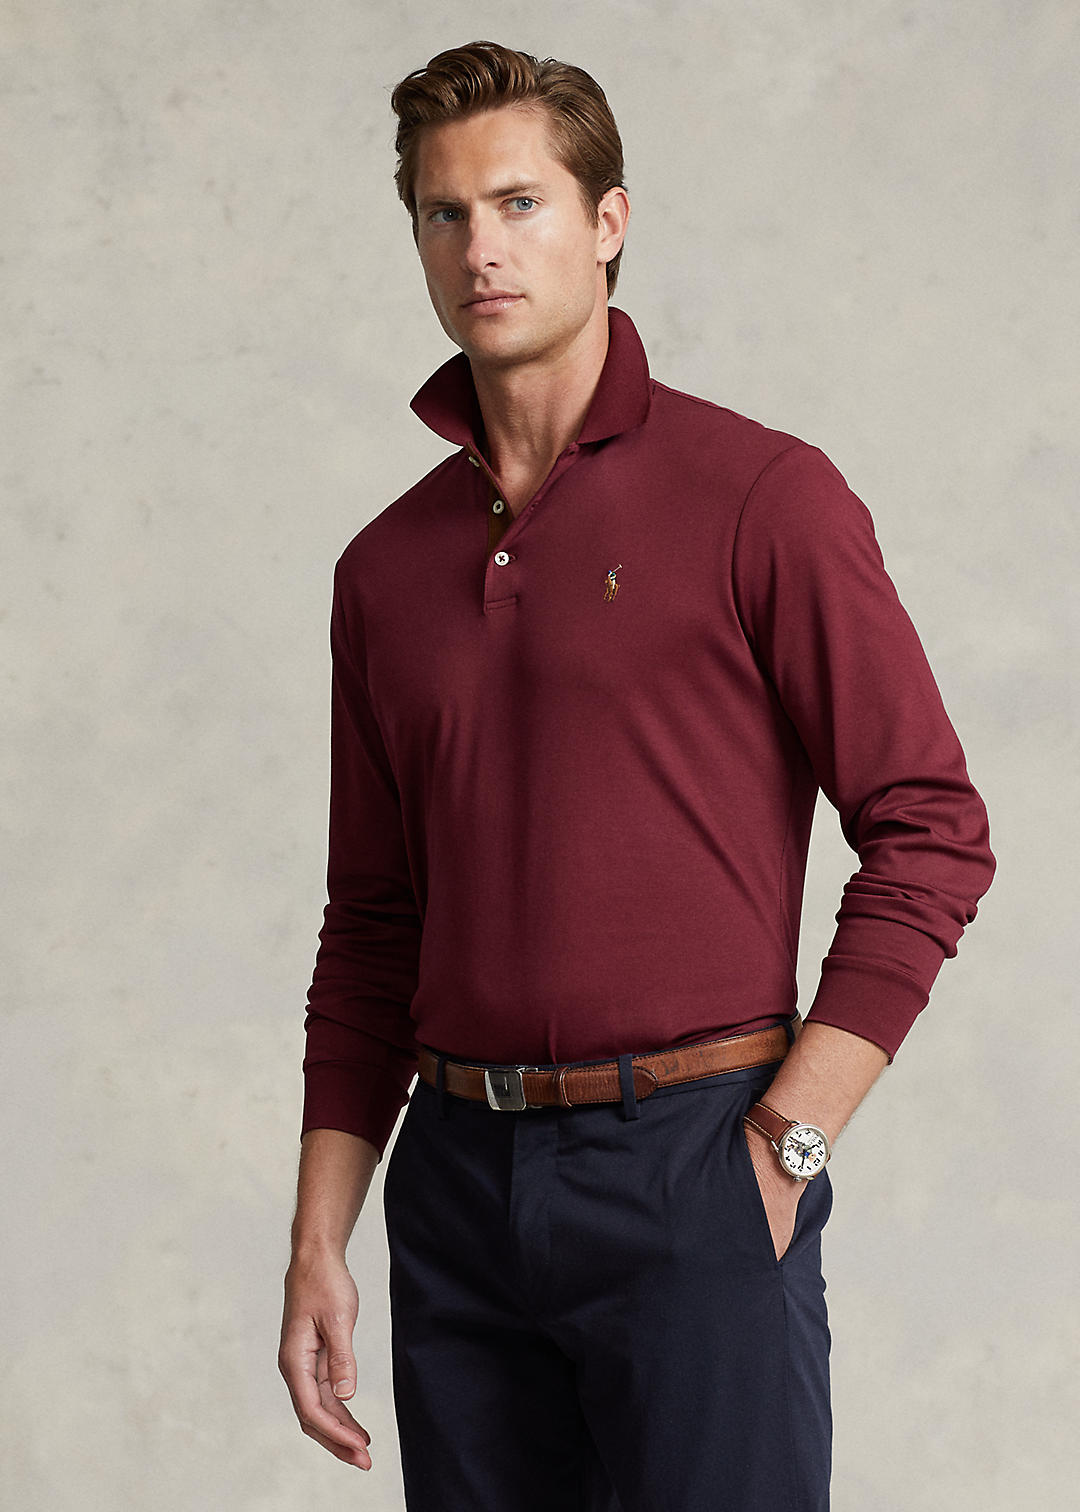 Classic Fit Soft Cotton Polo Shirt - All Fits